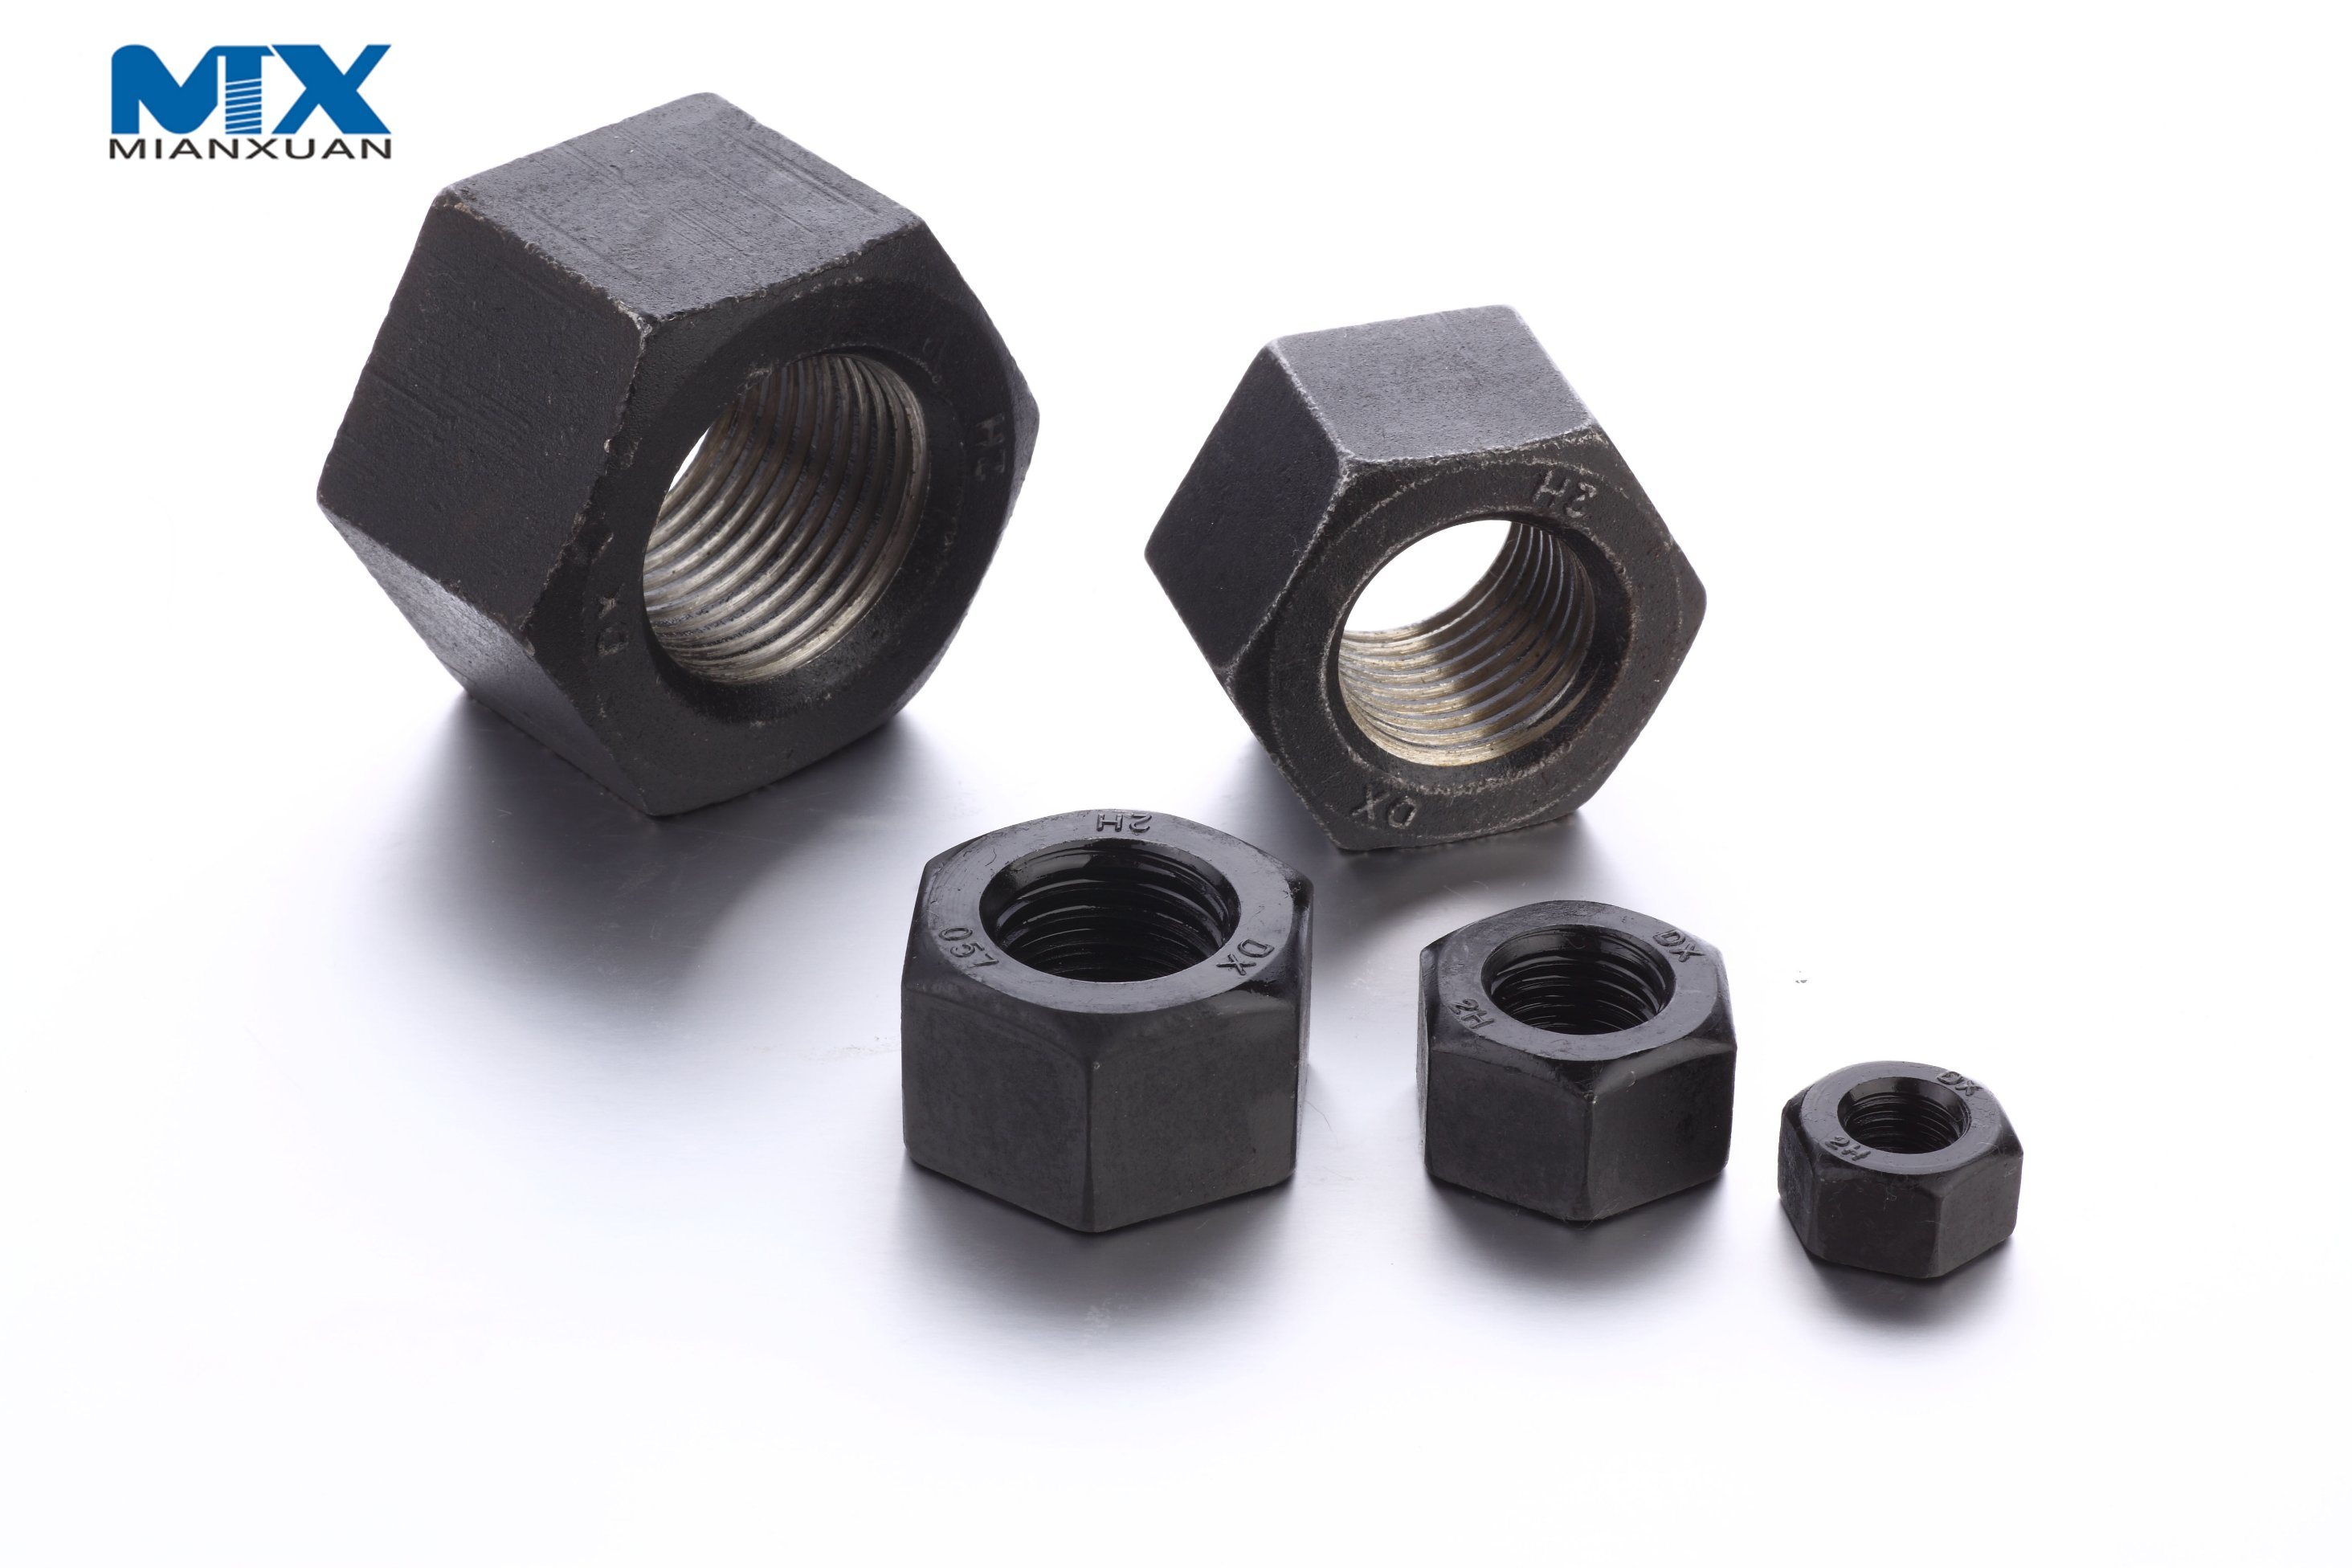 Hex Nuts for Construction and Furniture